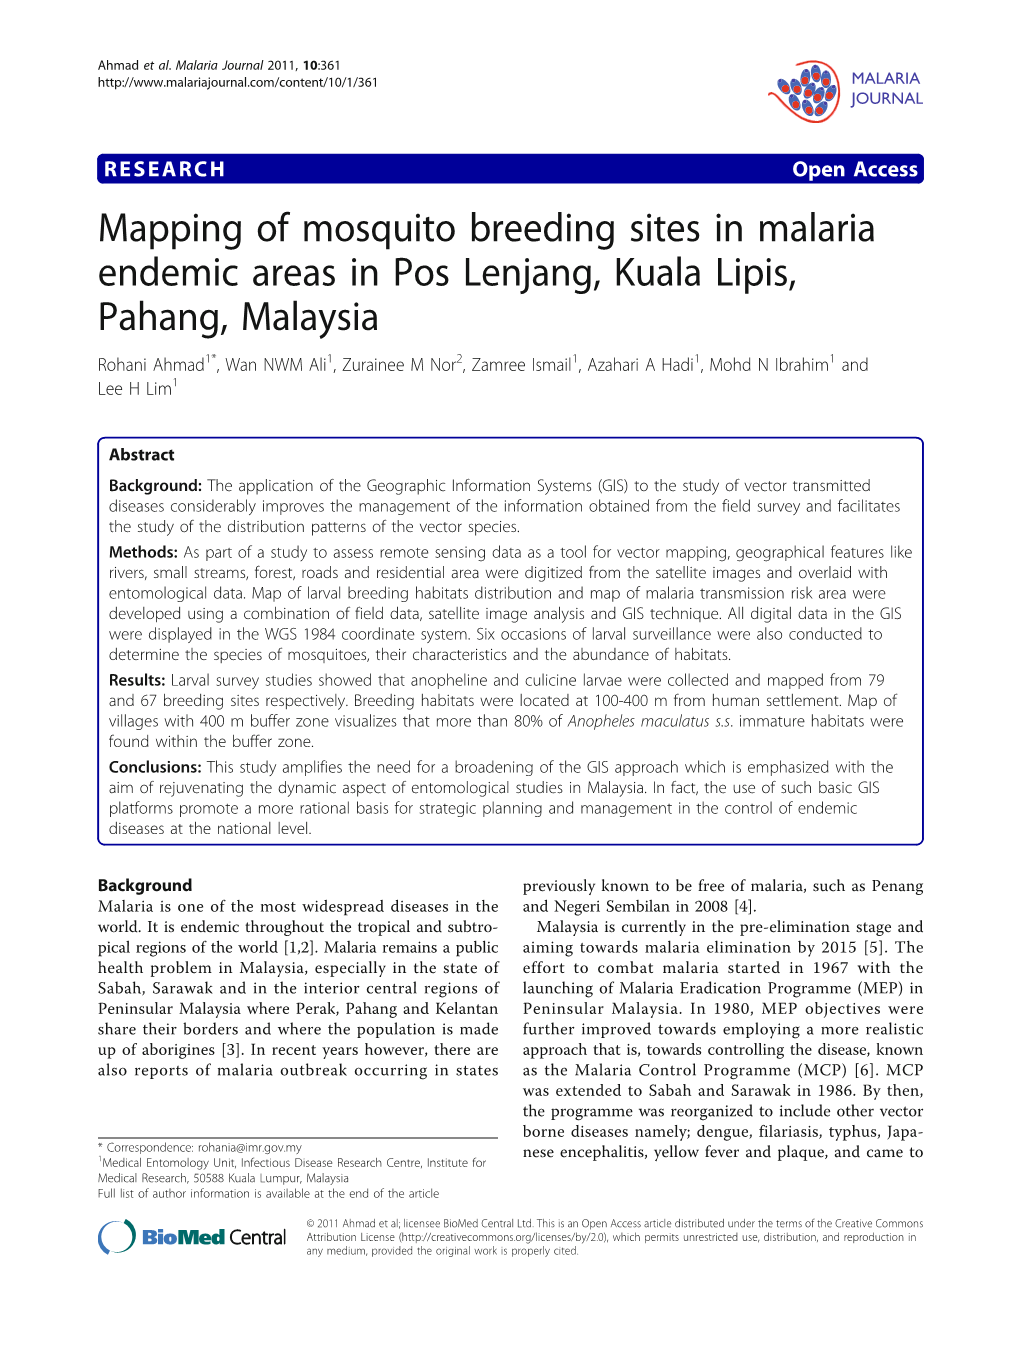 Mapping of Mosquito Breeding Sites in Malaria Endemic Areas in Pos